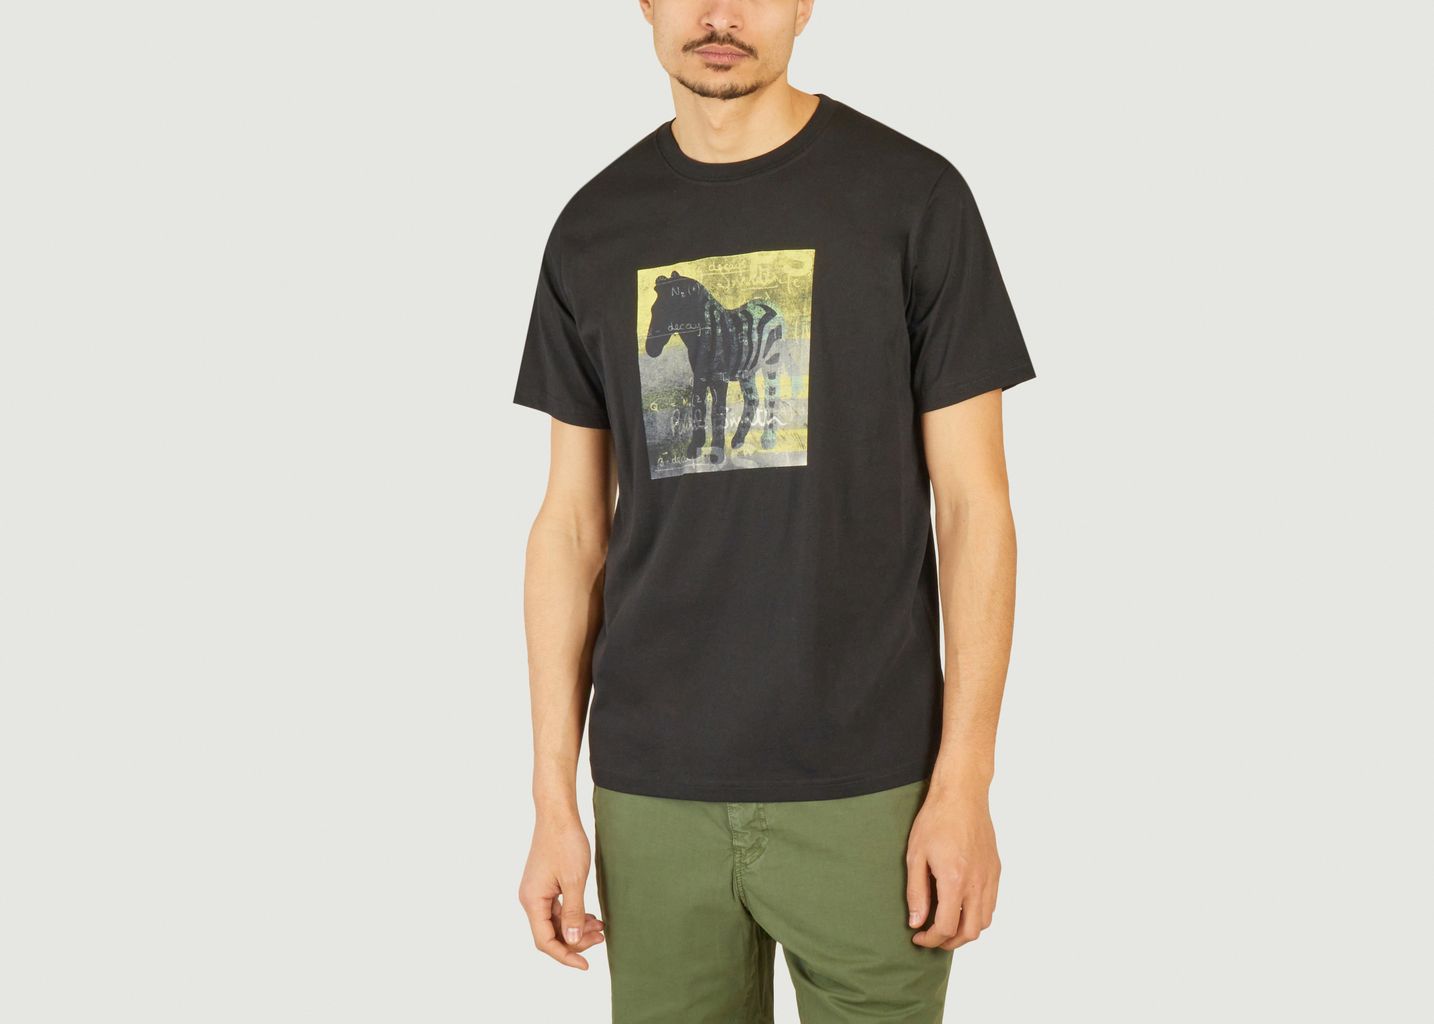 Tee-shirt Zebra Square - PS by PAUL SMITH